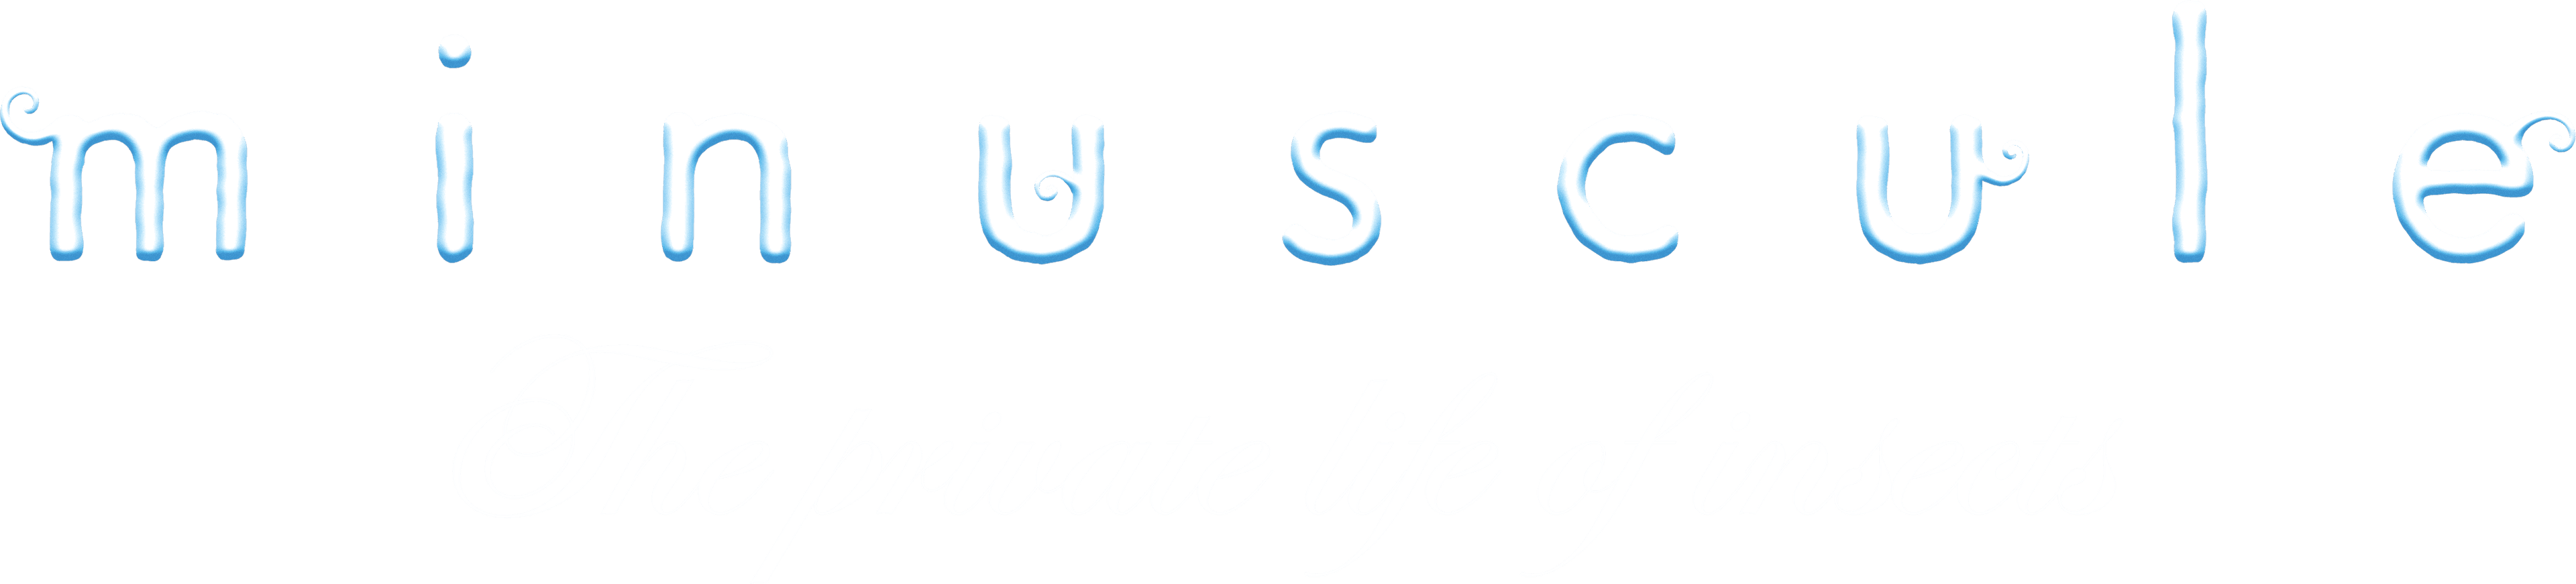 Minuscule: The Private Life of Insects logo